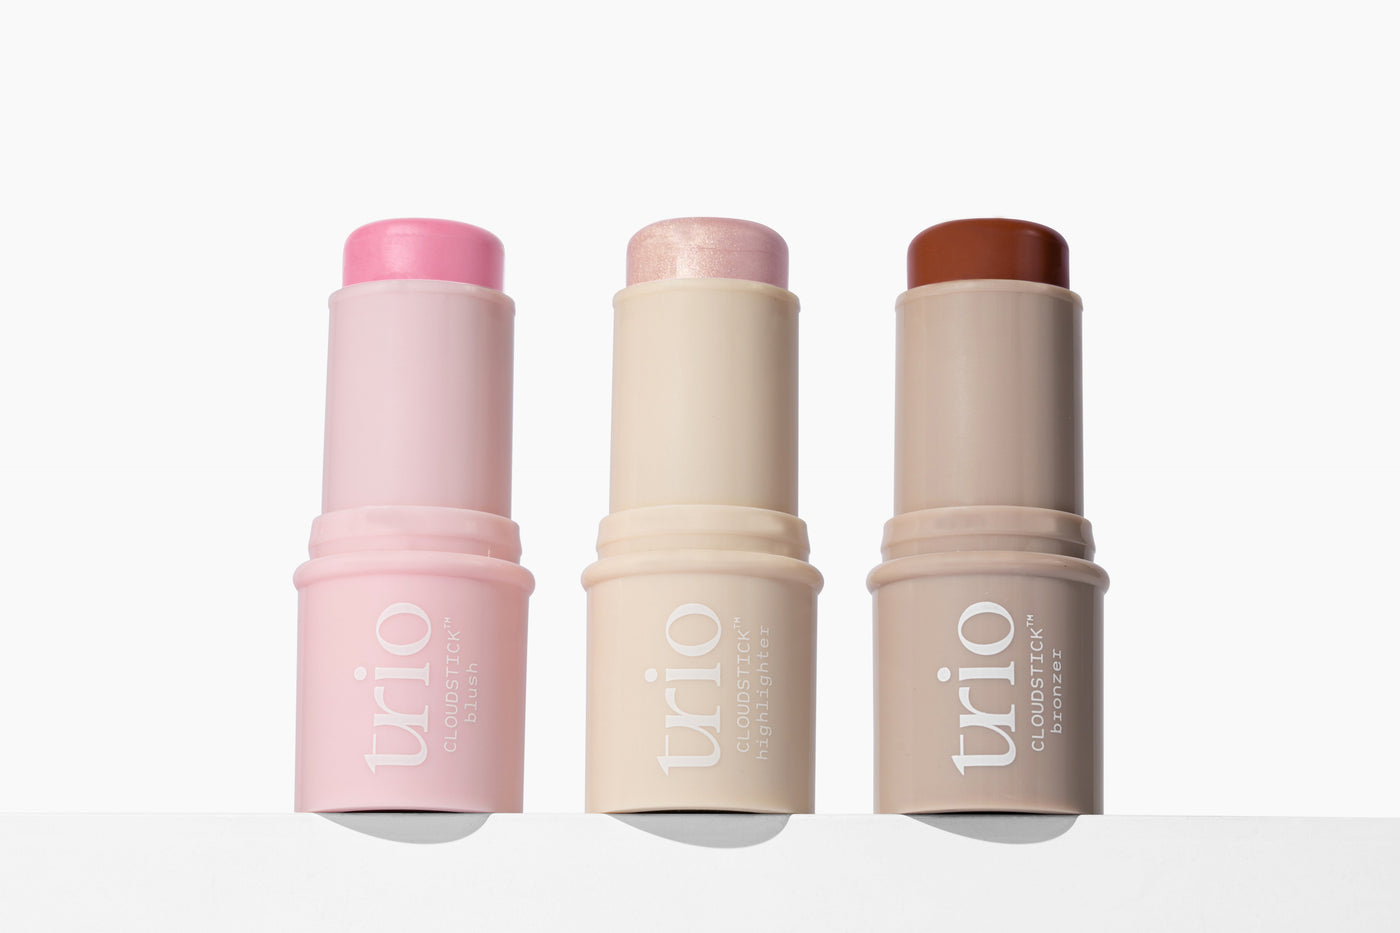 cloudstick trio from trio beauty. blush, bronzer, and highlighter trio kit